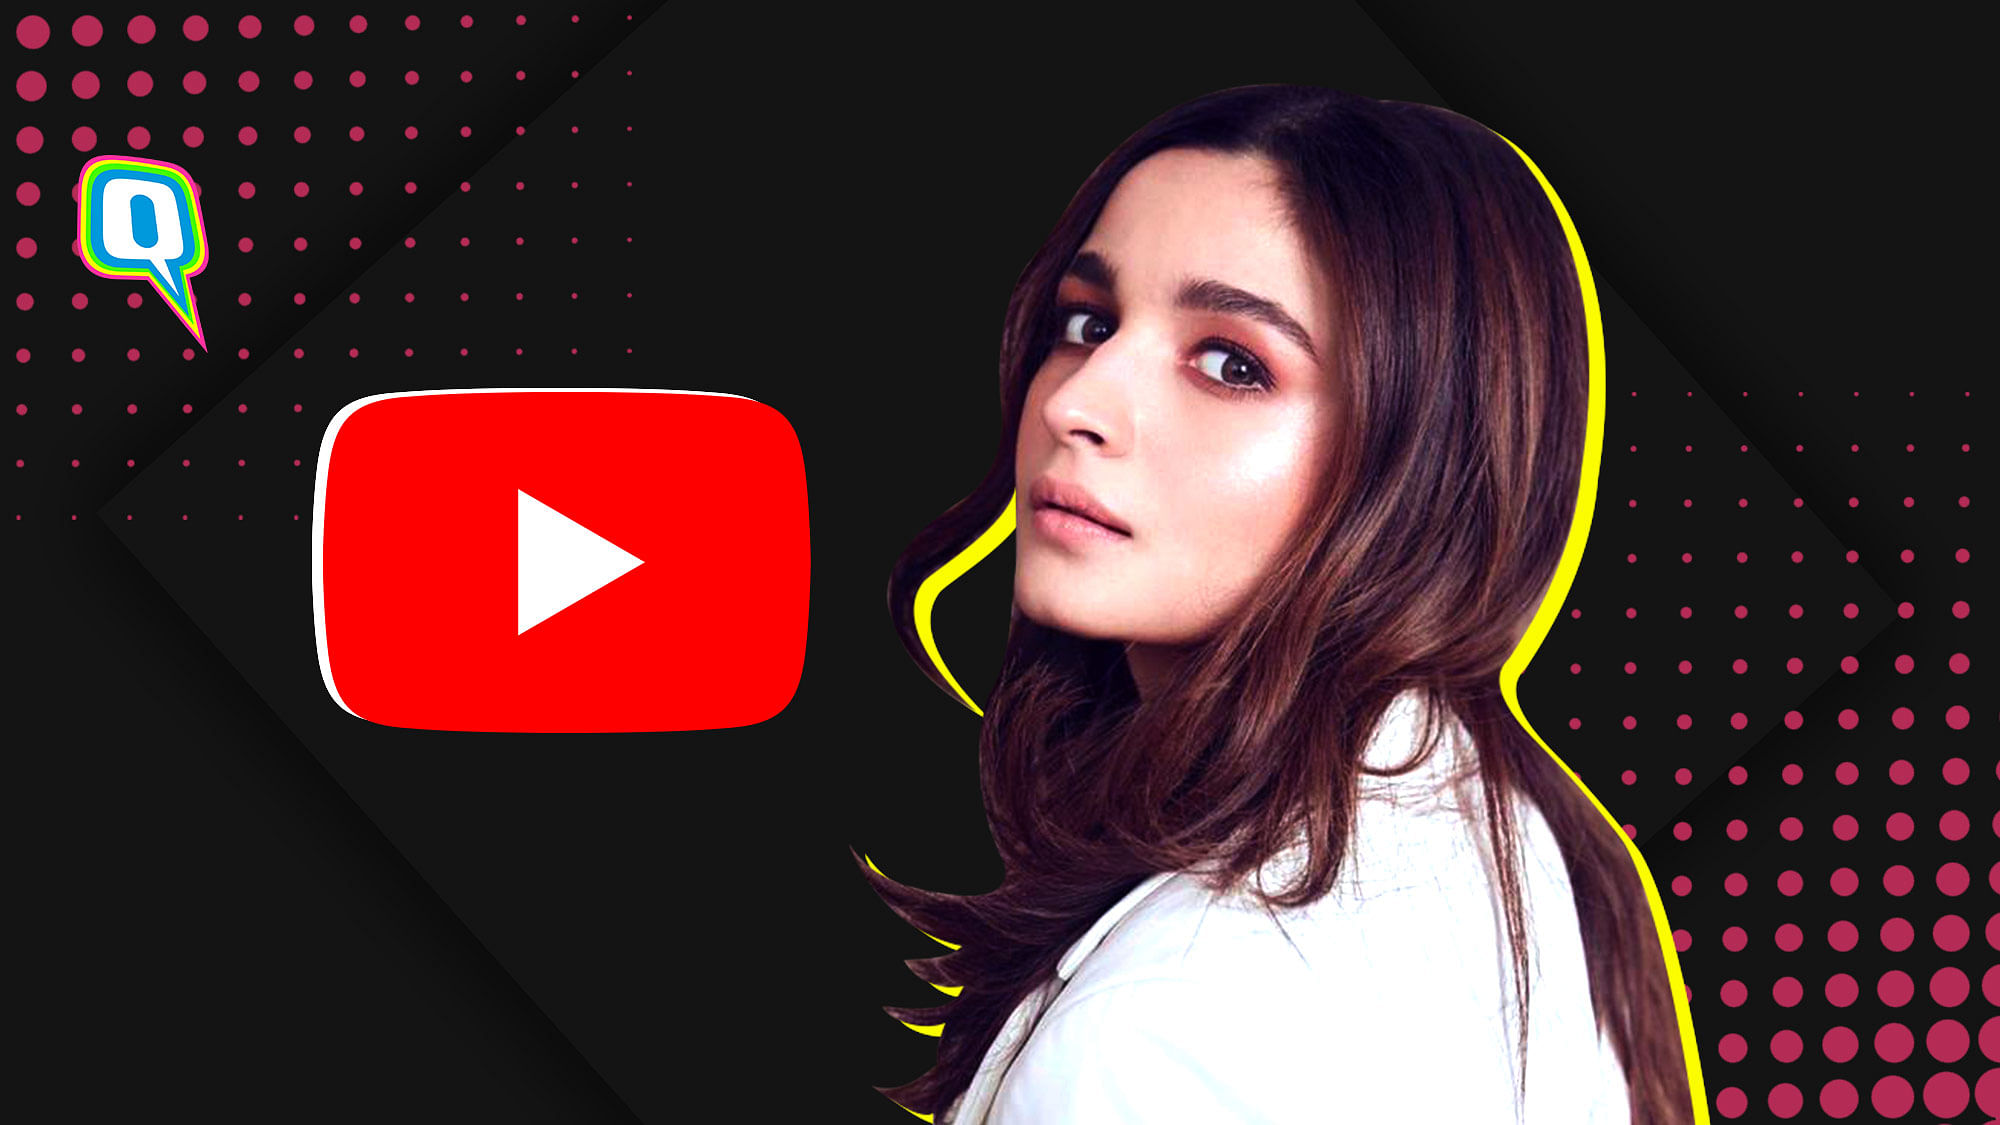 If you’re Alia Bhatt, anything on YouTube is ‘content’.